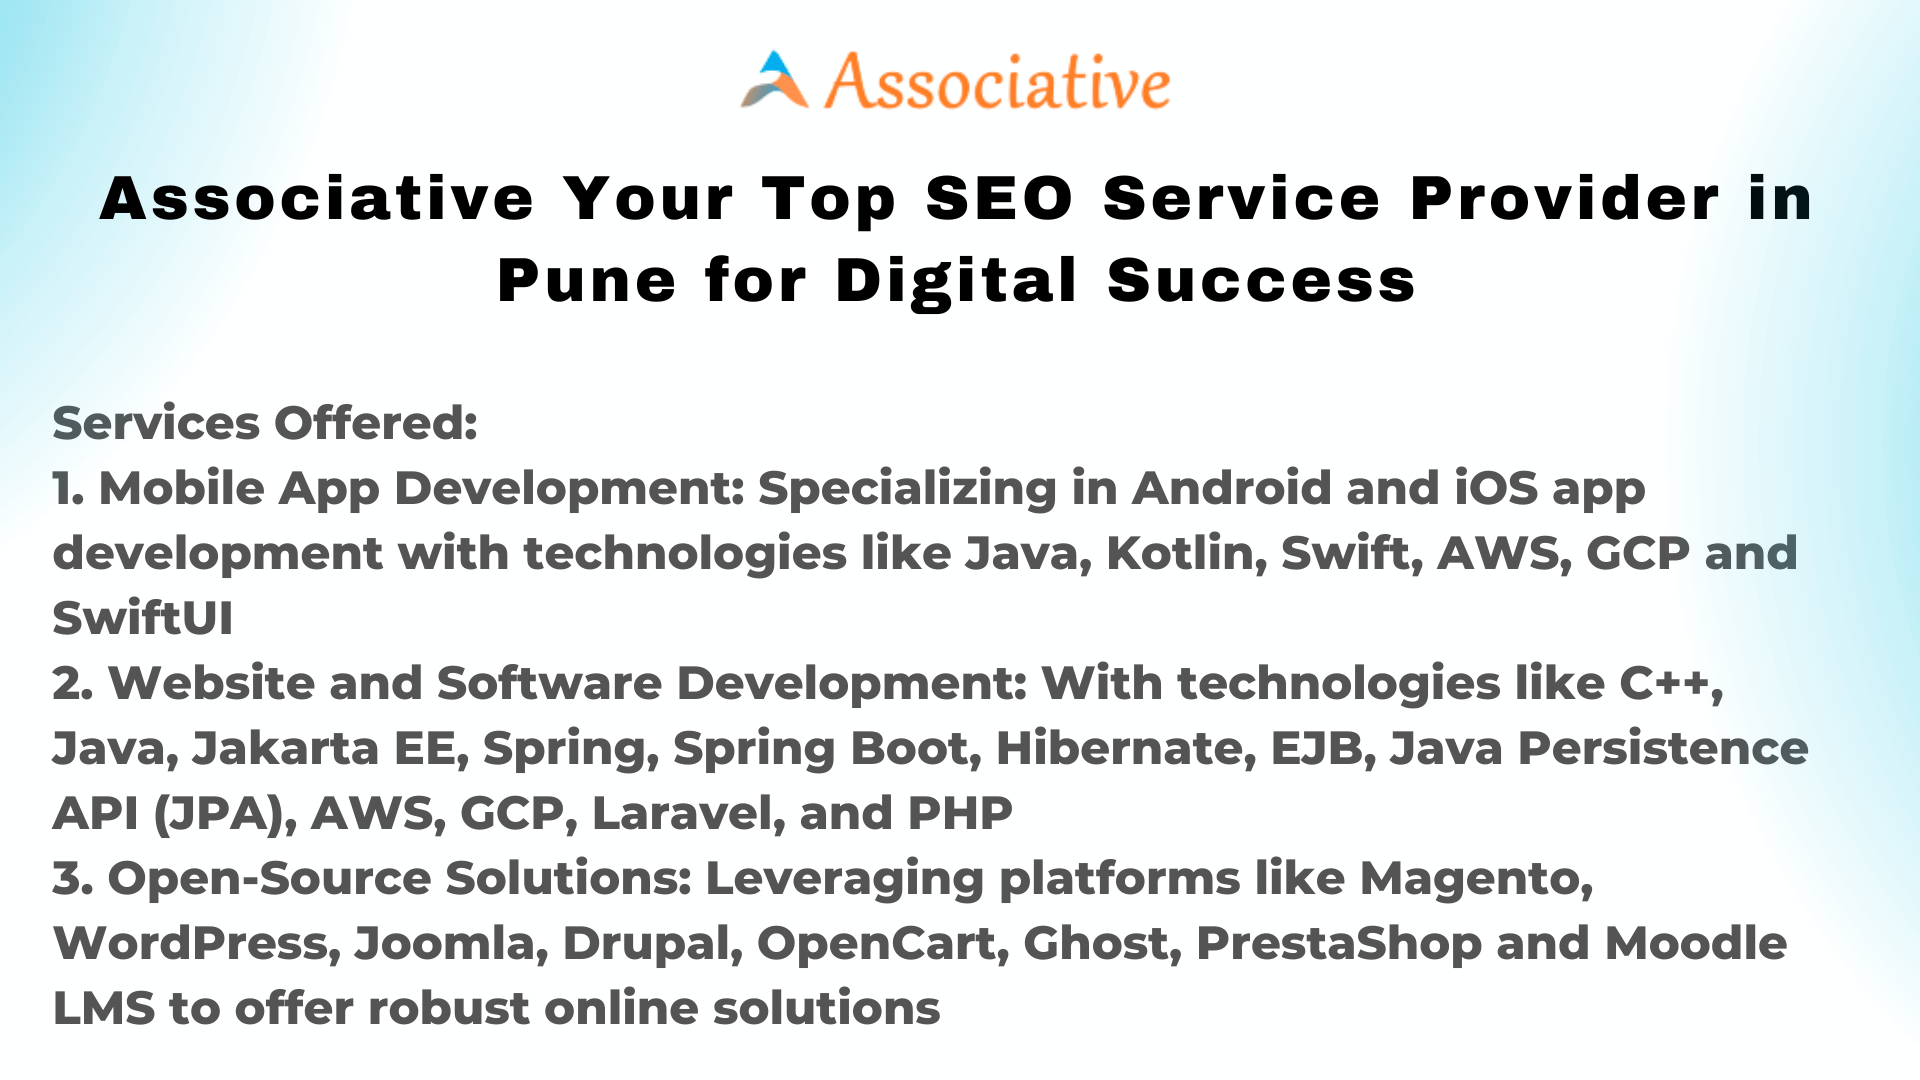 Associative Your Top SEO Service Provider in Pune for Digital Success